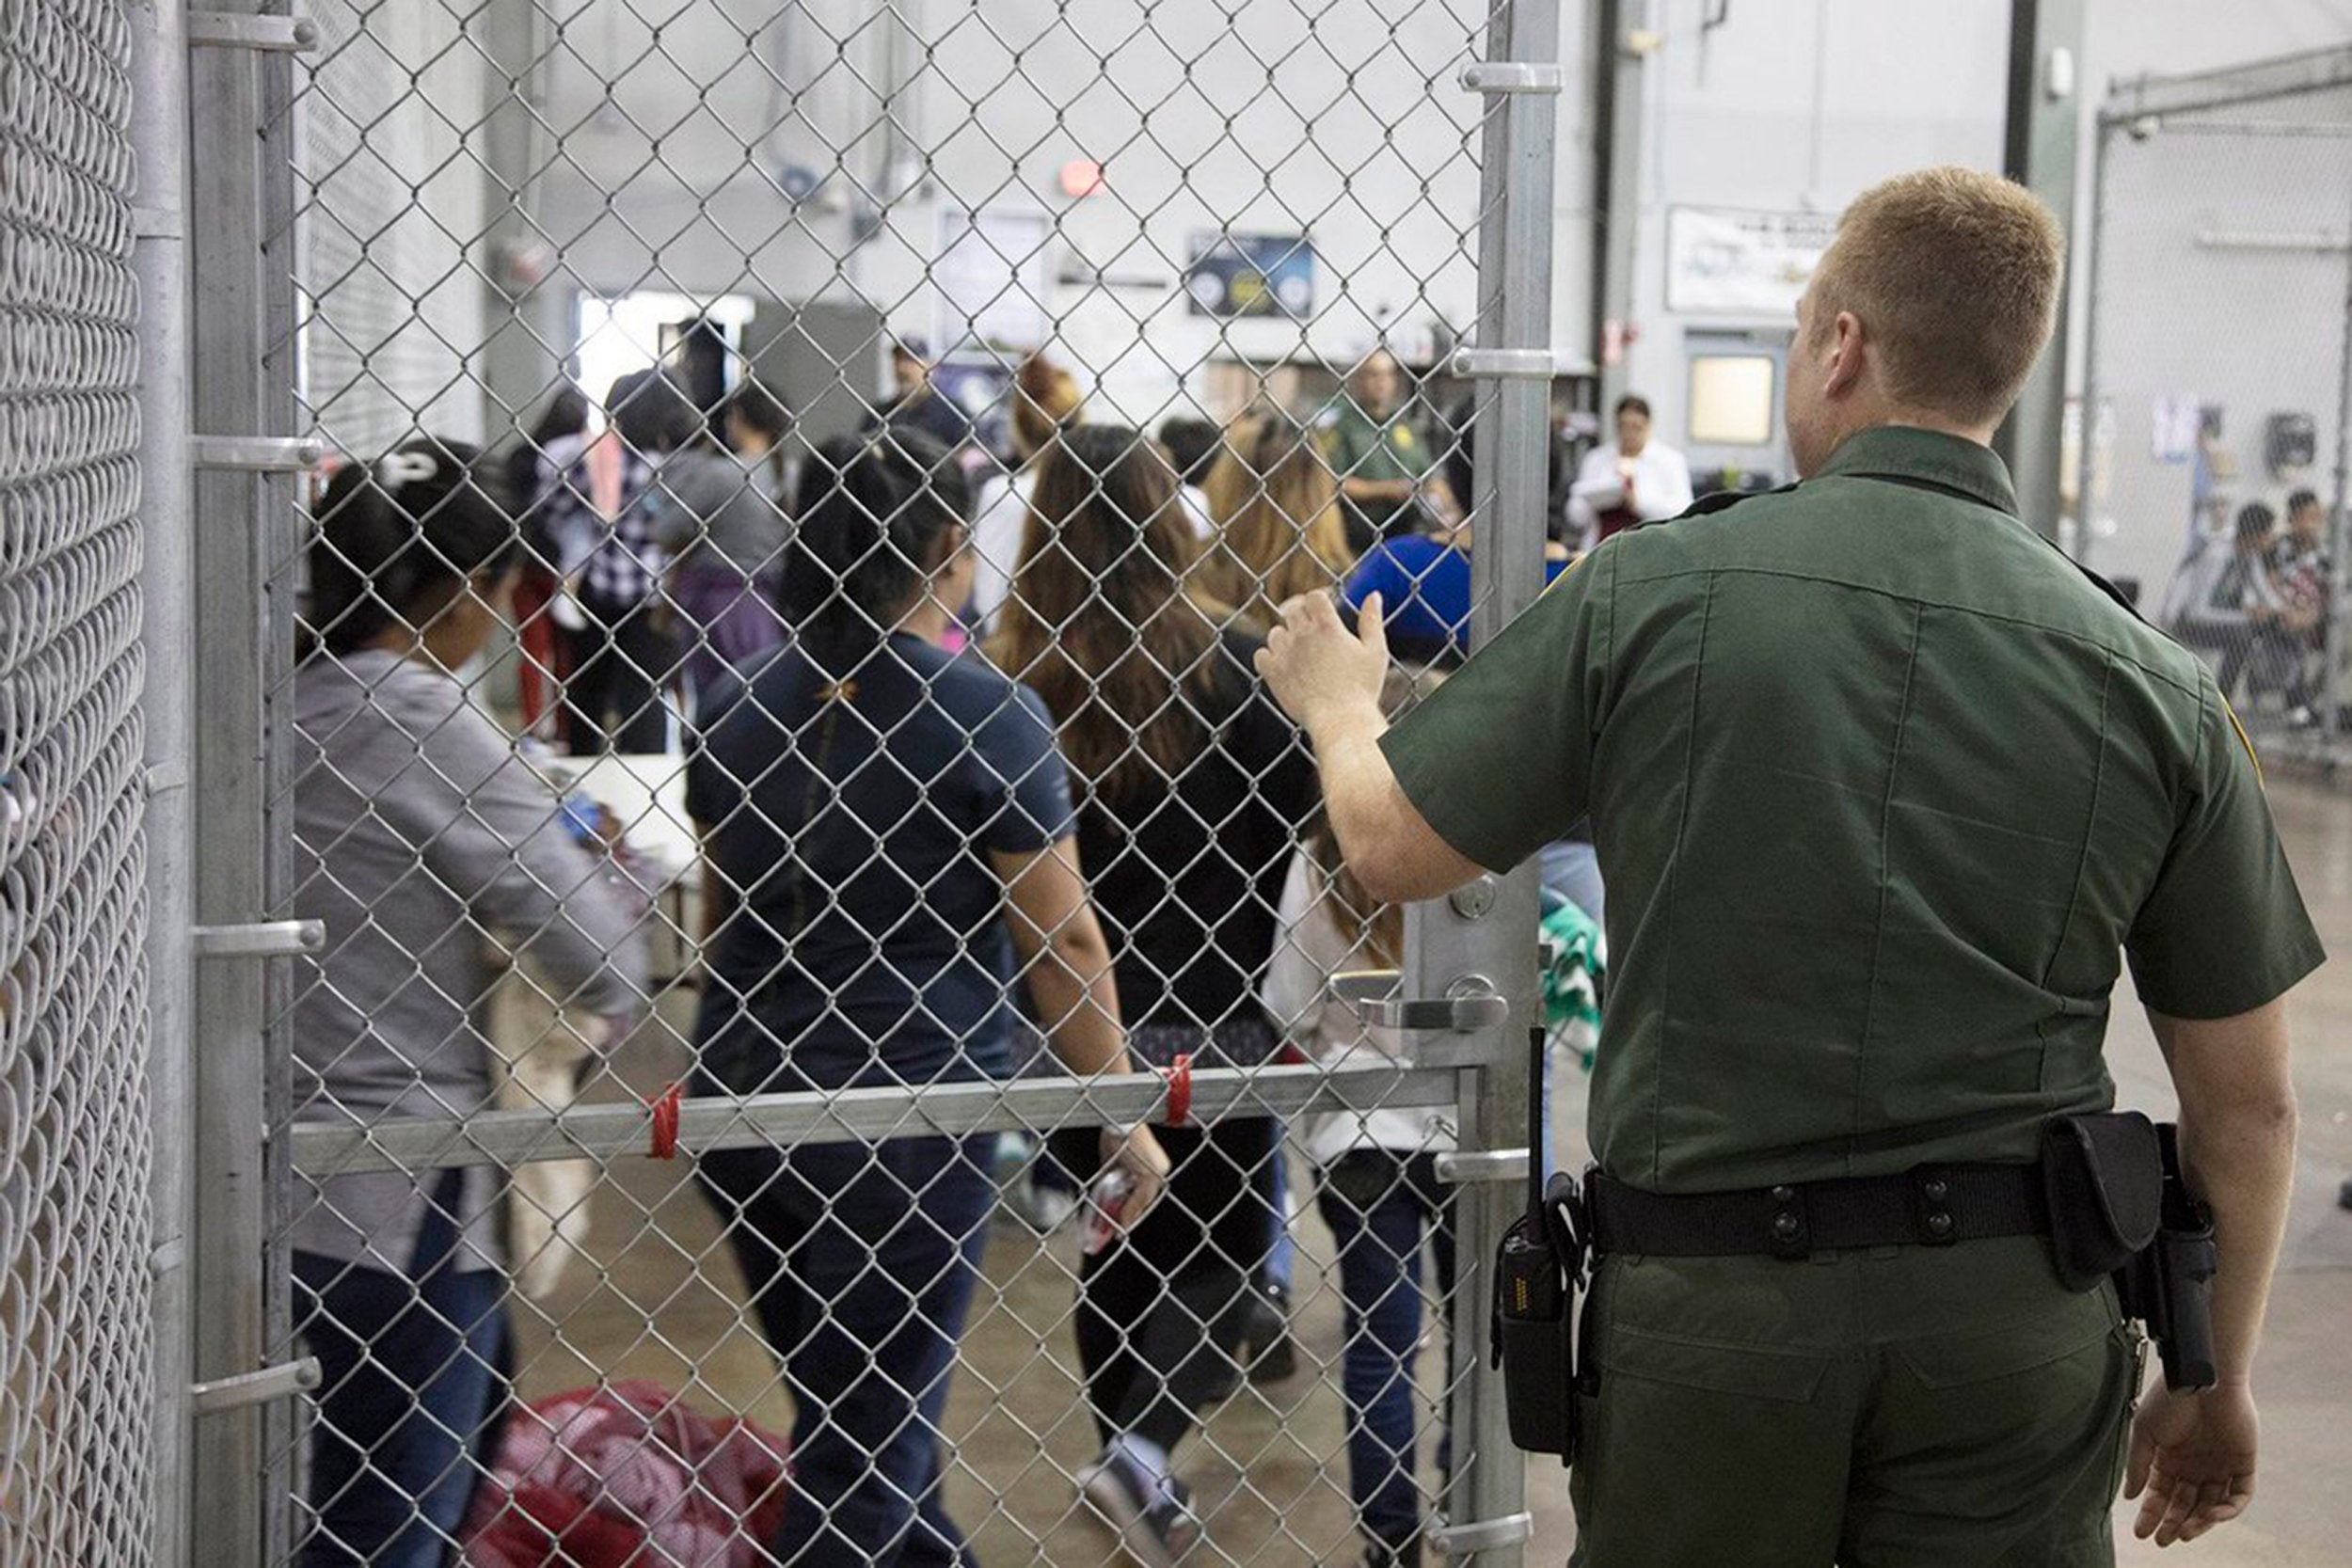 A US border patrol agent oversees migrants as they are processed at an immigrant detention centre